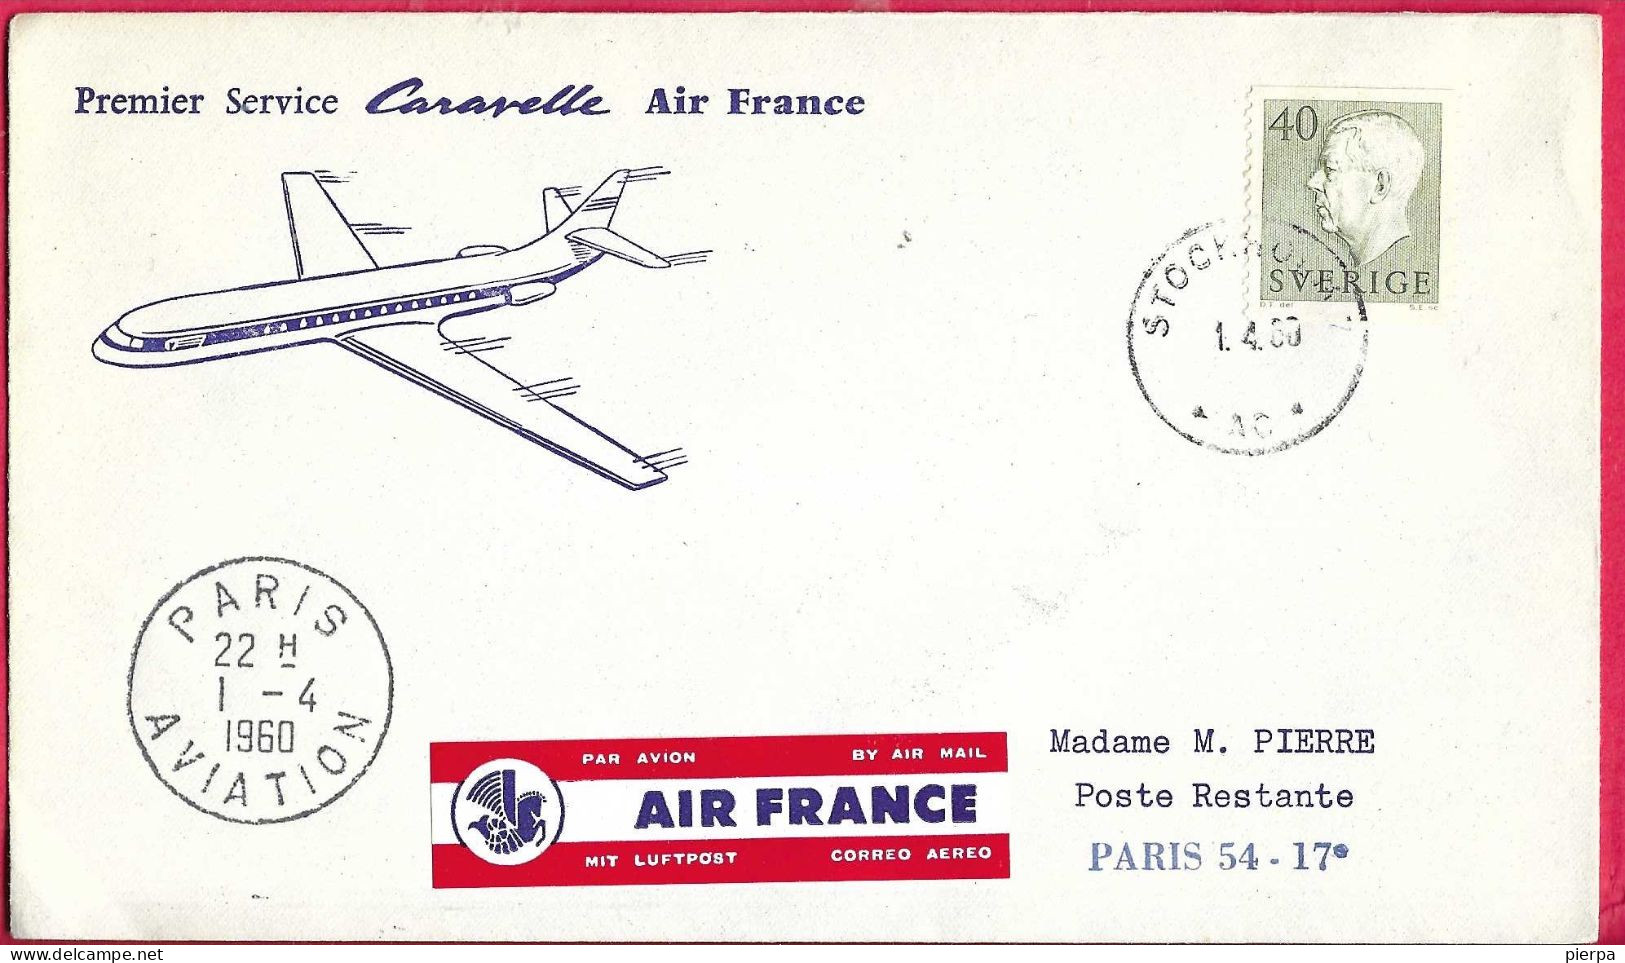 SVERIGE - FIRST CARAVELLE FLIGHT AIR FRANCE FROM STOCKHOLM TO PARIS *1.4.1960* ON OFFICIAL COVER - Briefe U. Dokumente